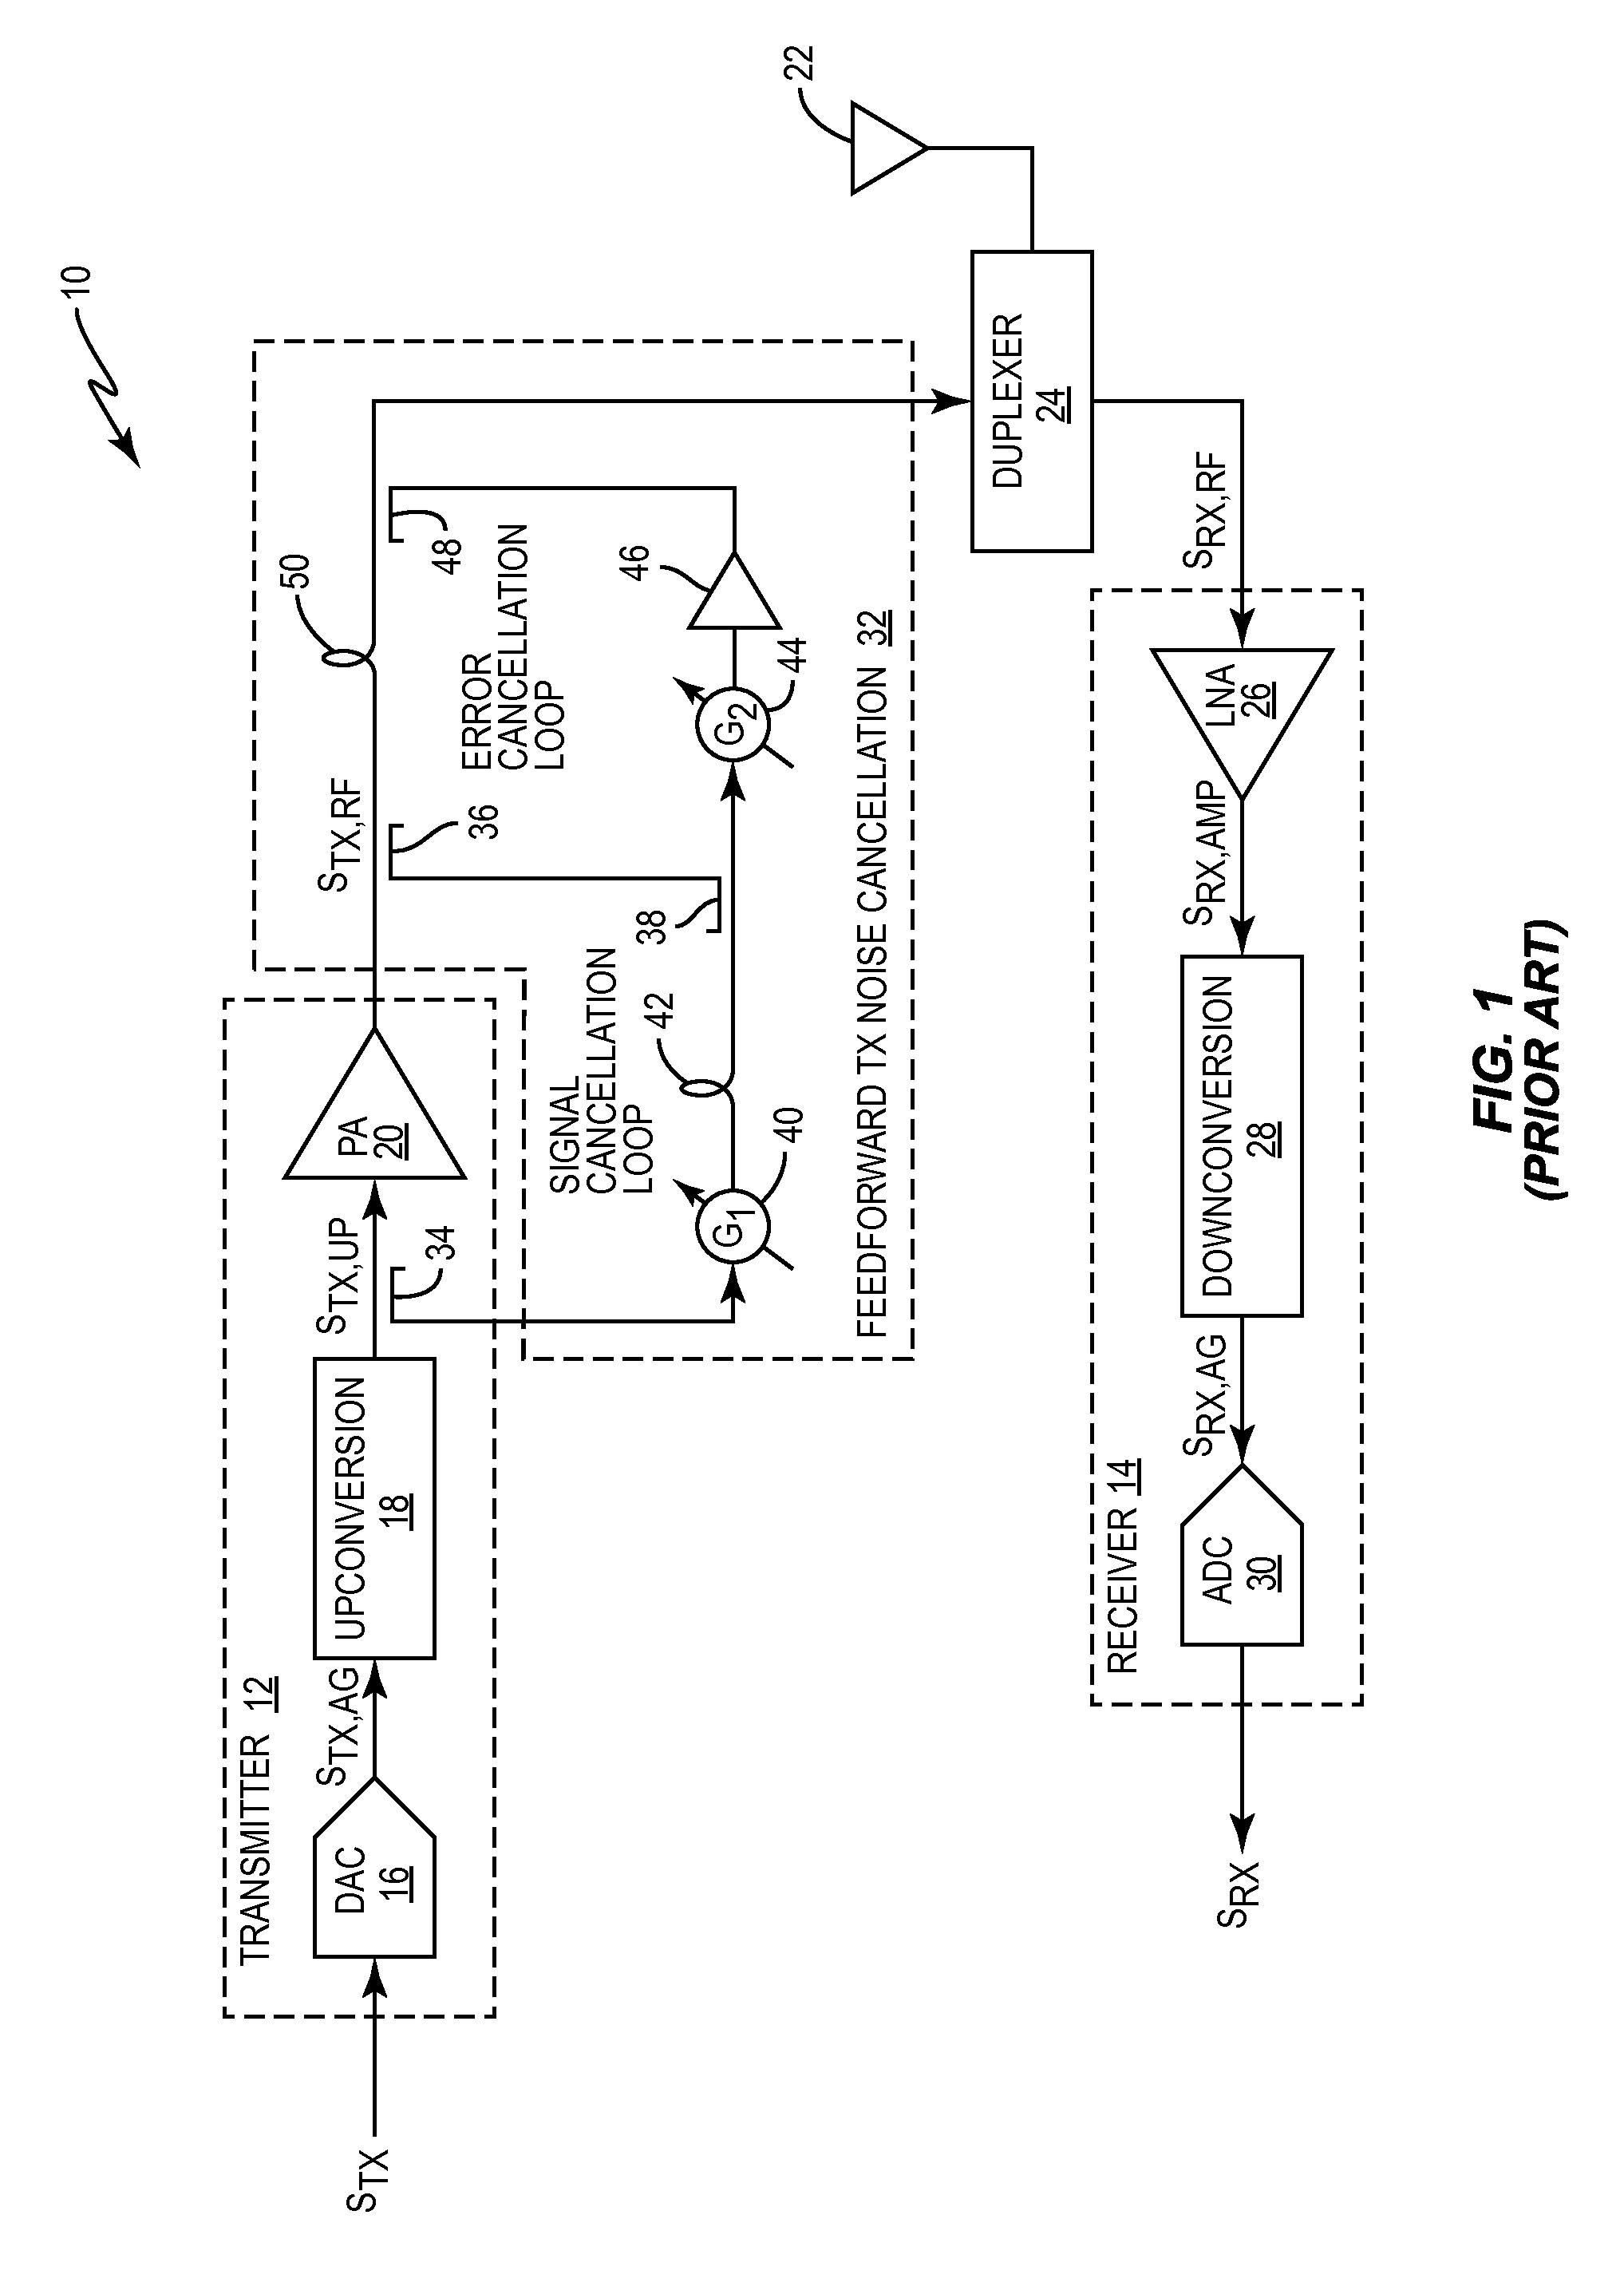 Transmitter noise suppression in receiver